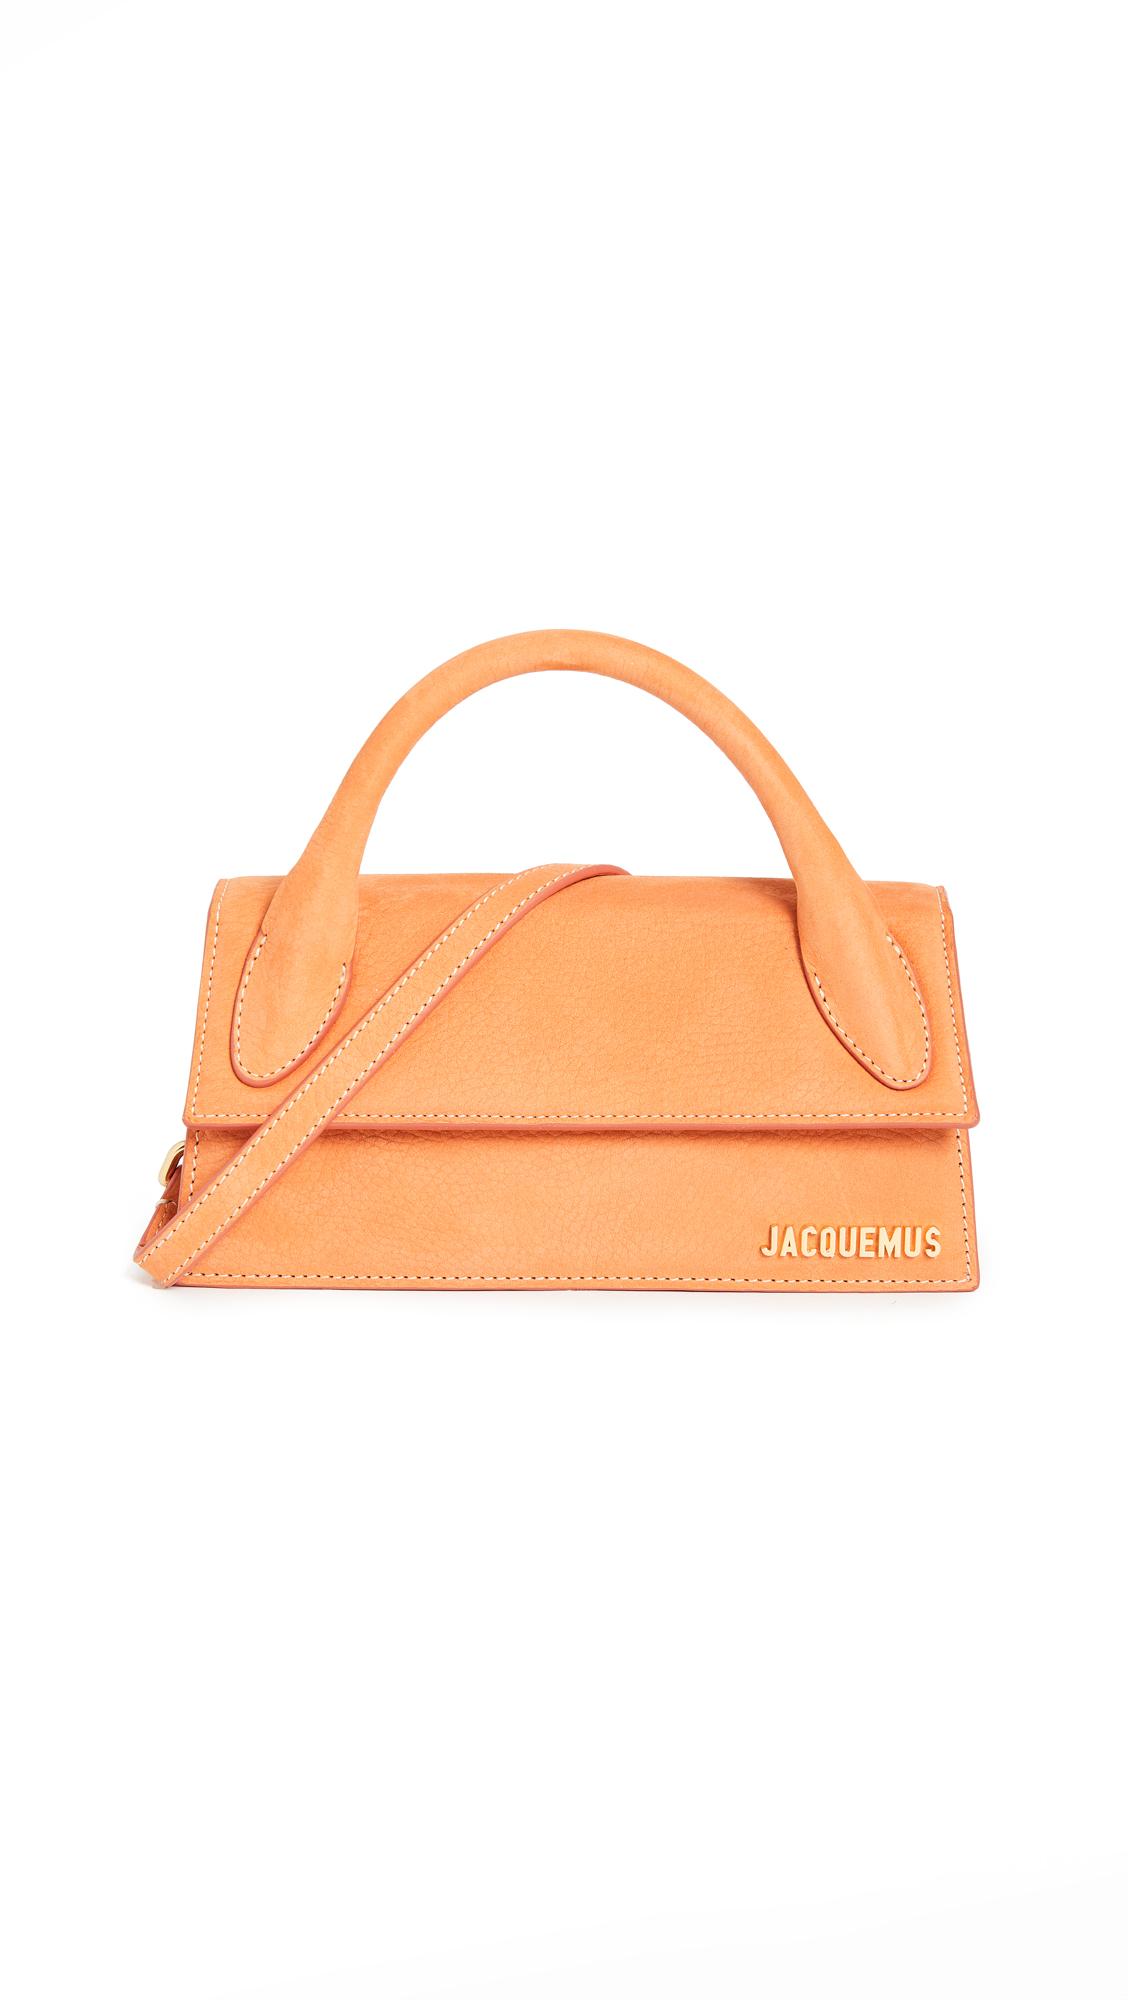 Jacquemus Leather Le Chiquito Long Bag in Orange | Lyst